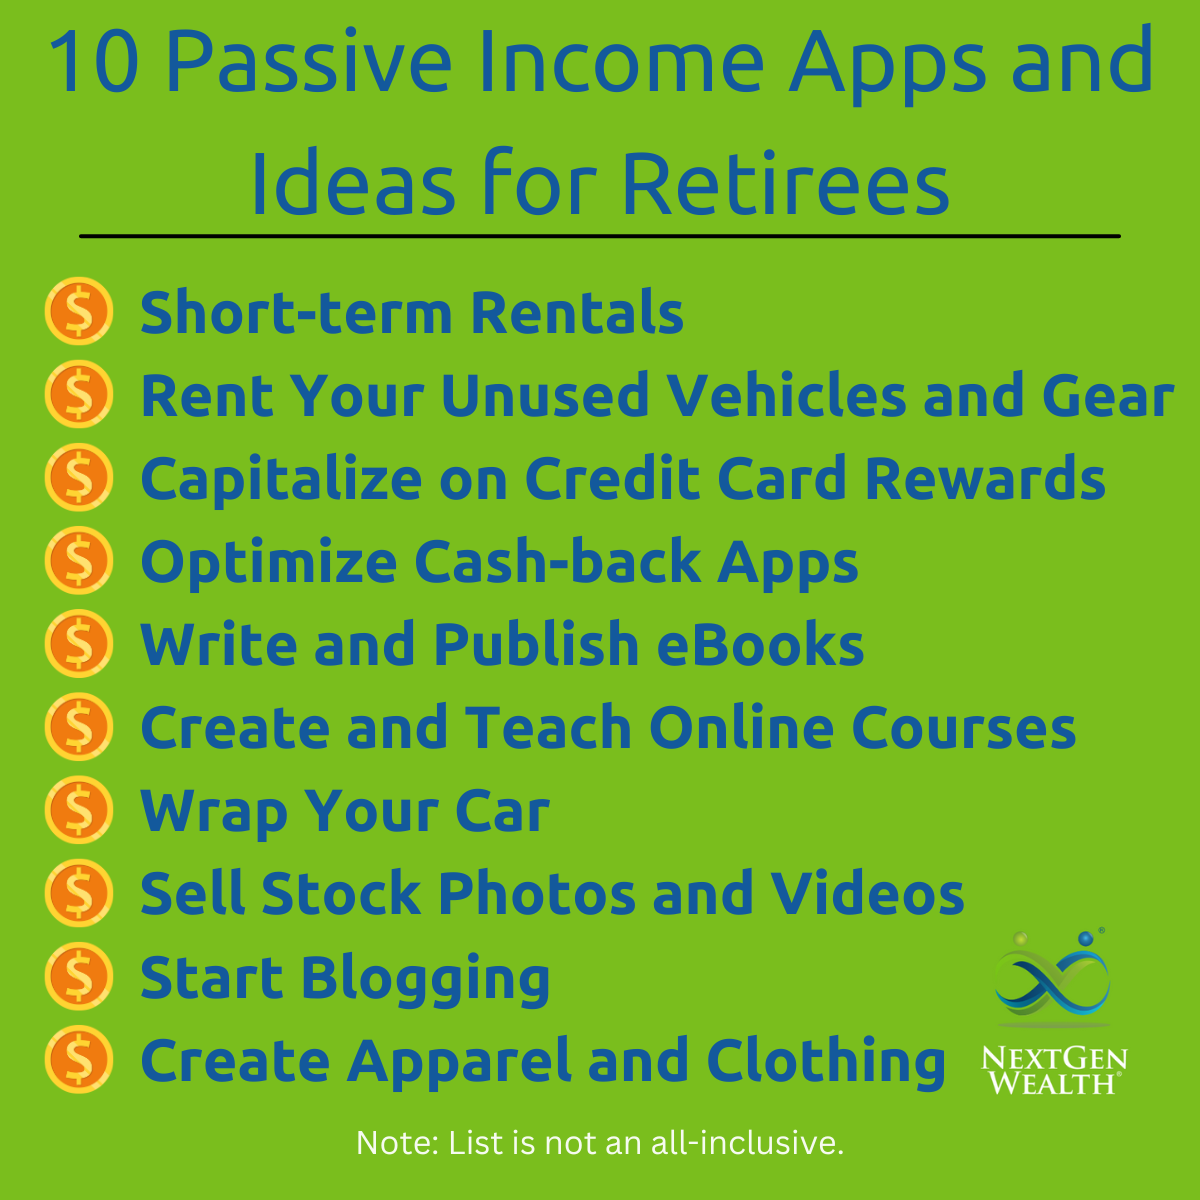 10 Passive Income Apps and Ideas for Retirees